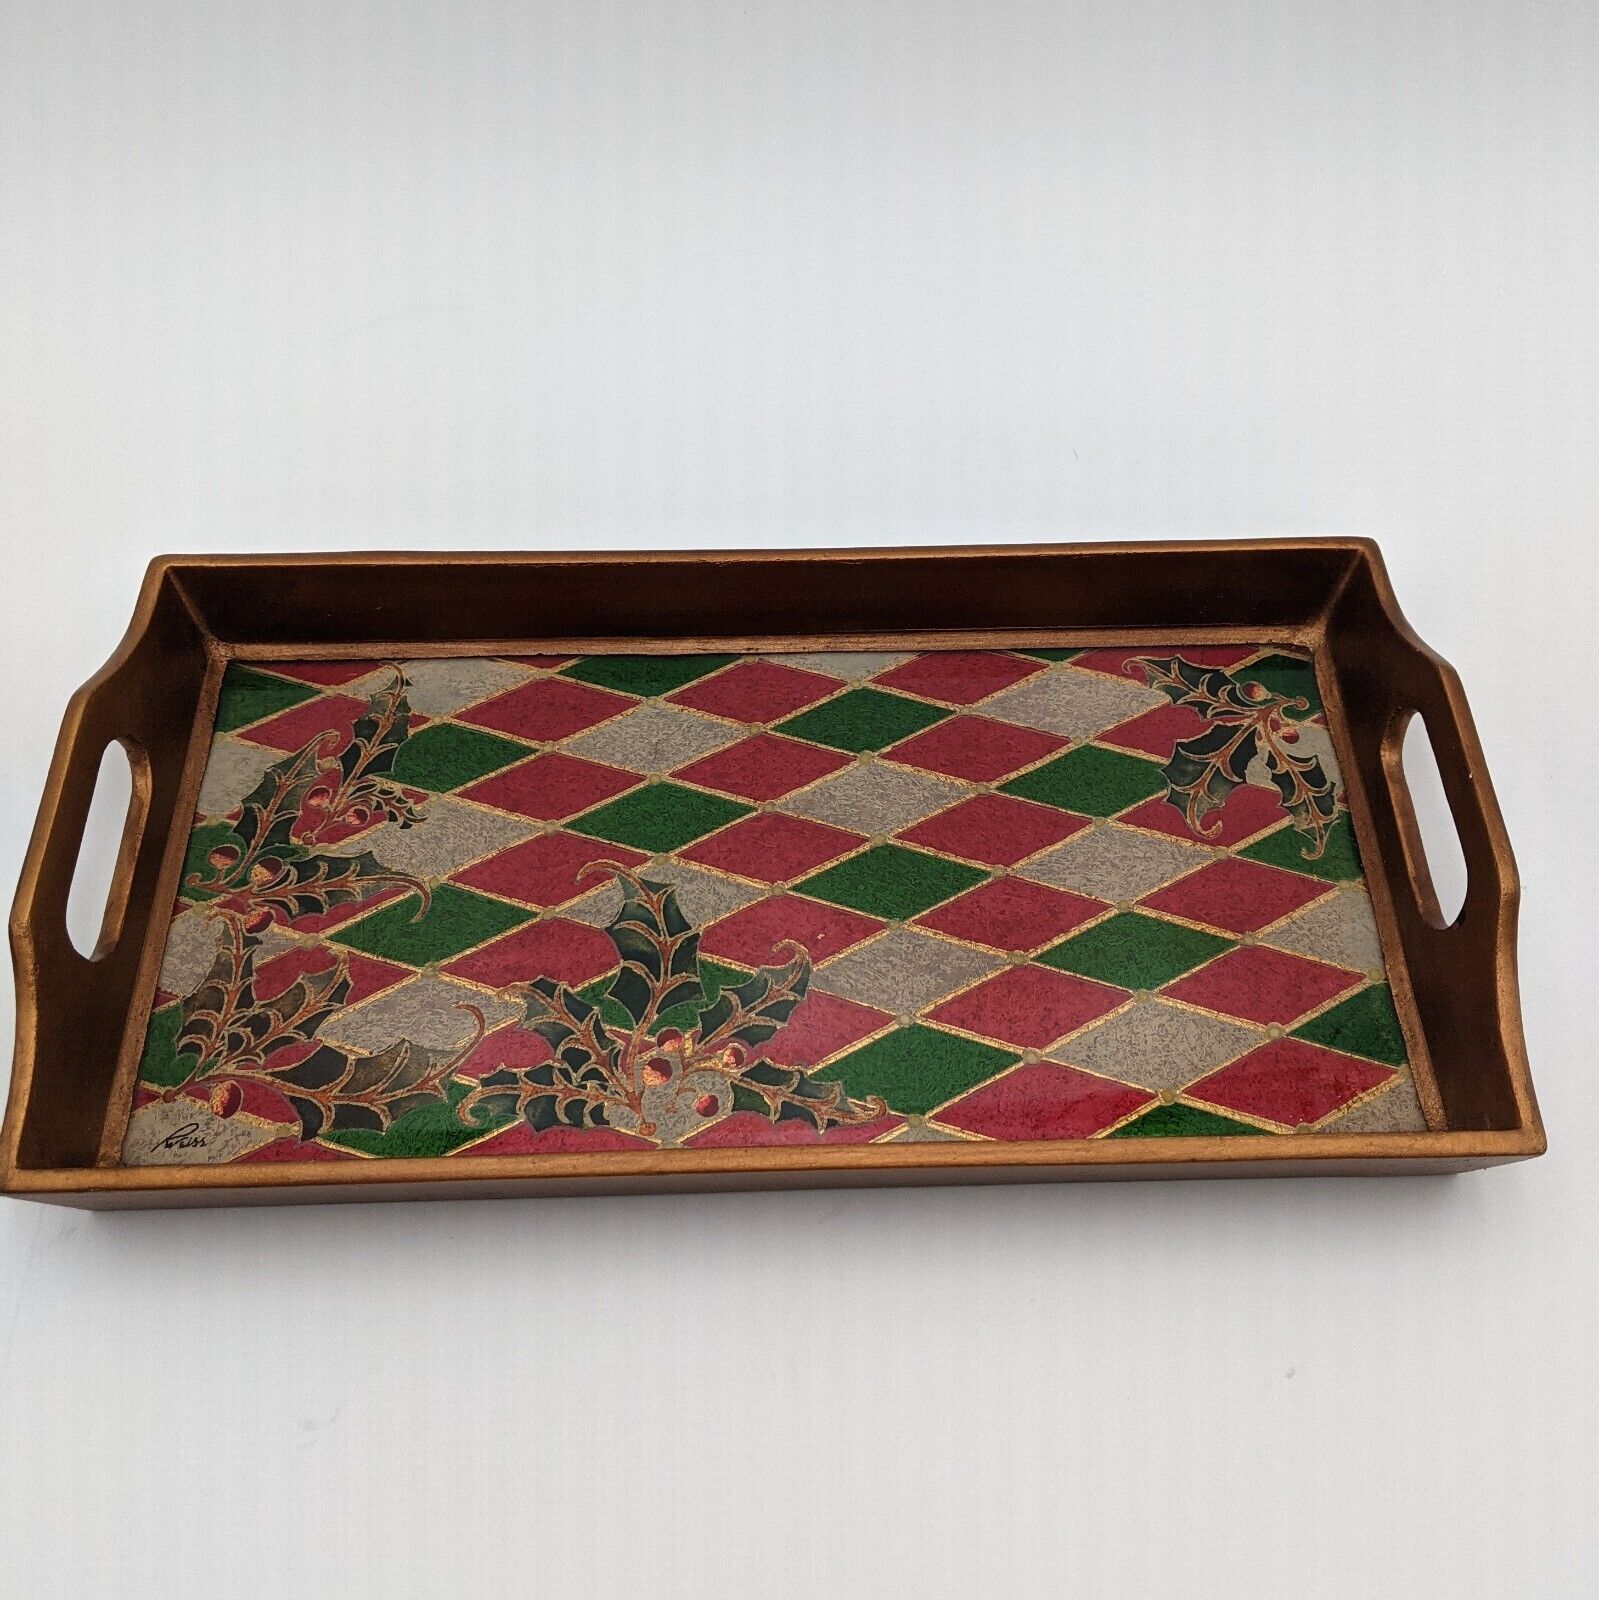 Robert M Weiss Peruvian Harlequin Holly Tray Vintage 6.5 X 12.5in. Christmas 